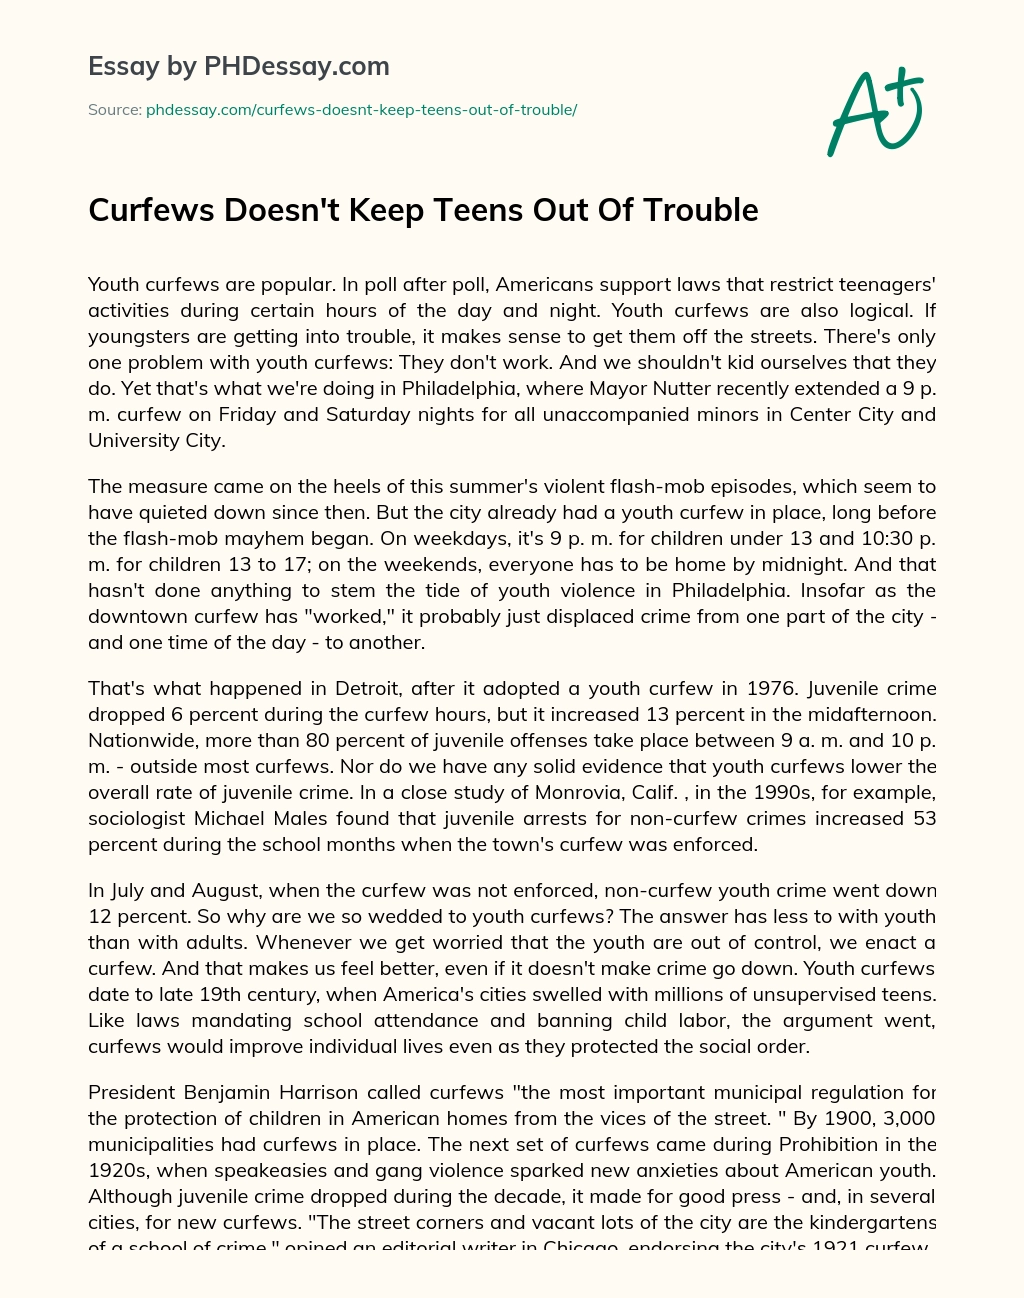 Curfews Doesn’t Keep Teens Out Of Trouble essay